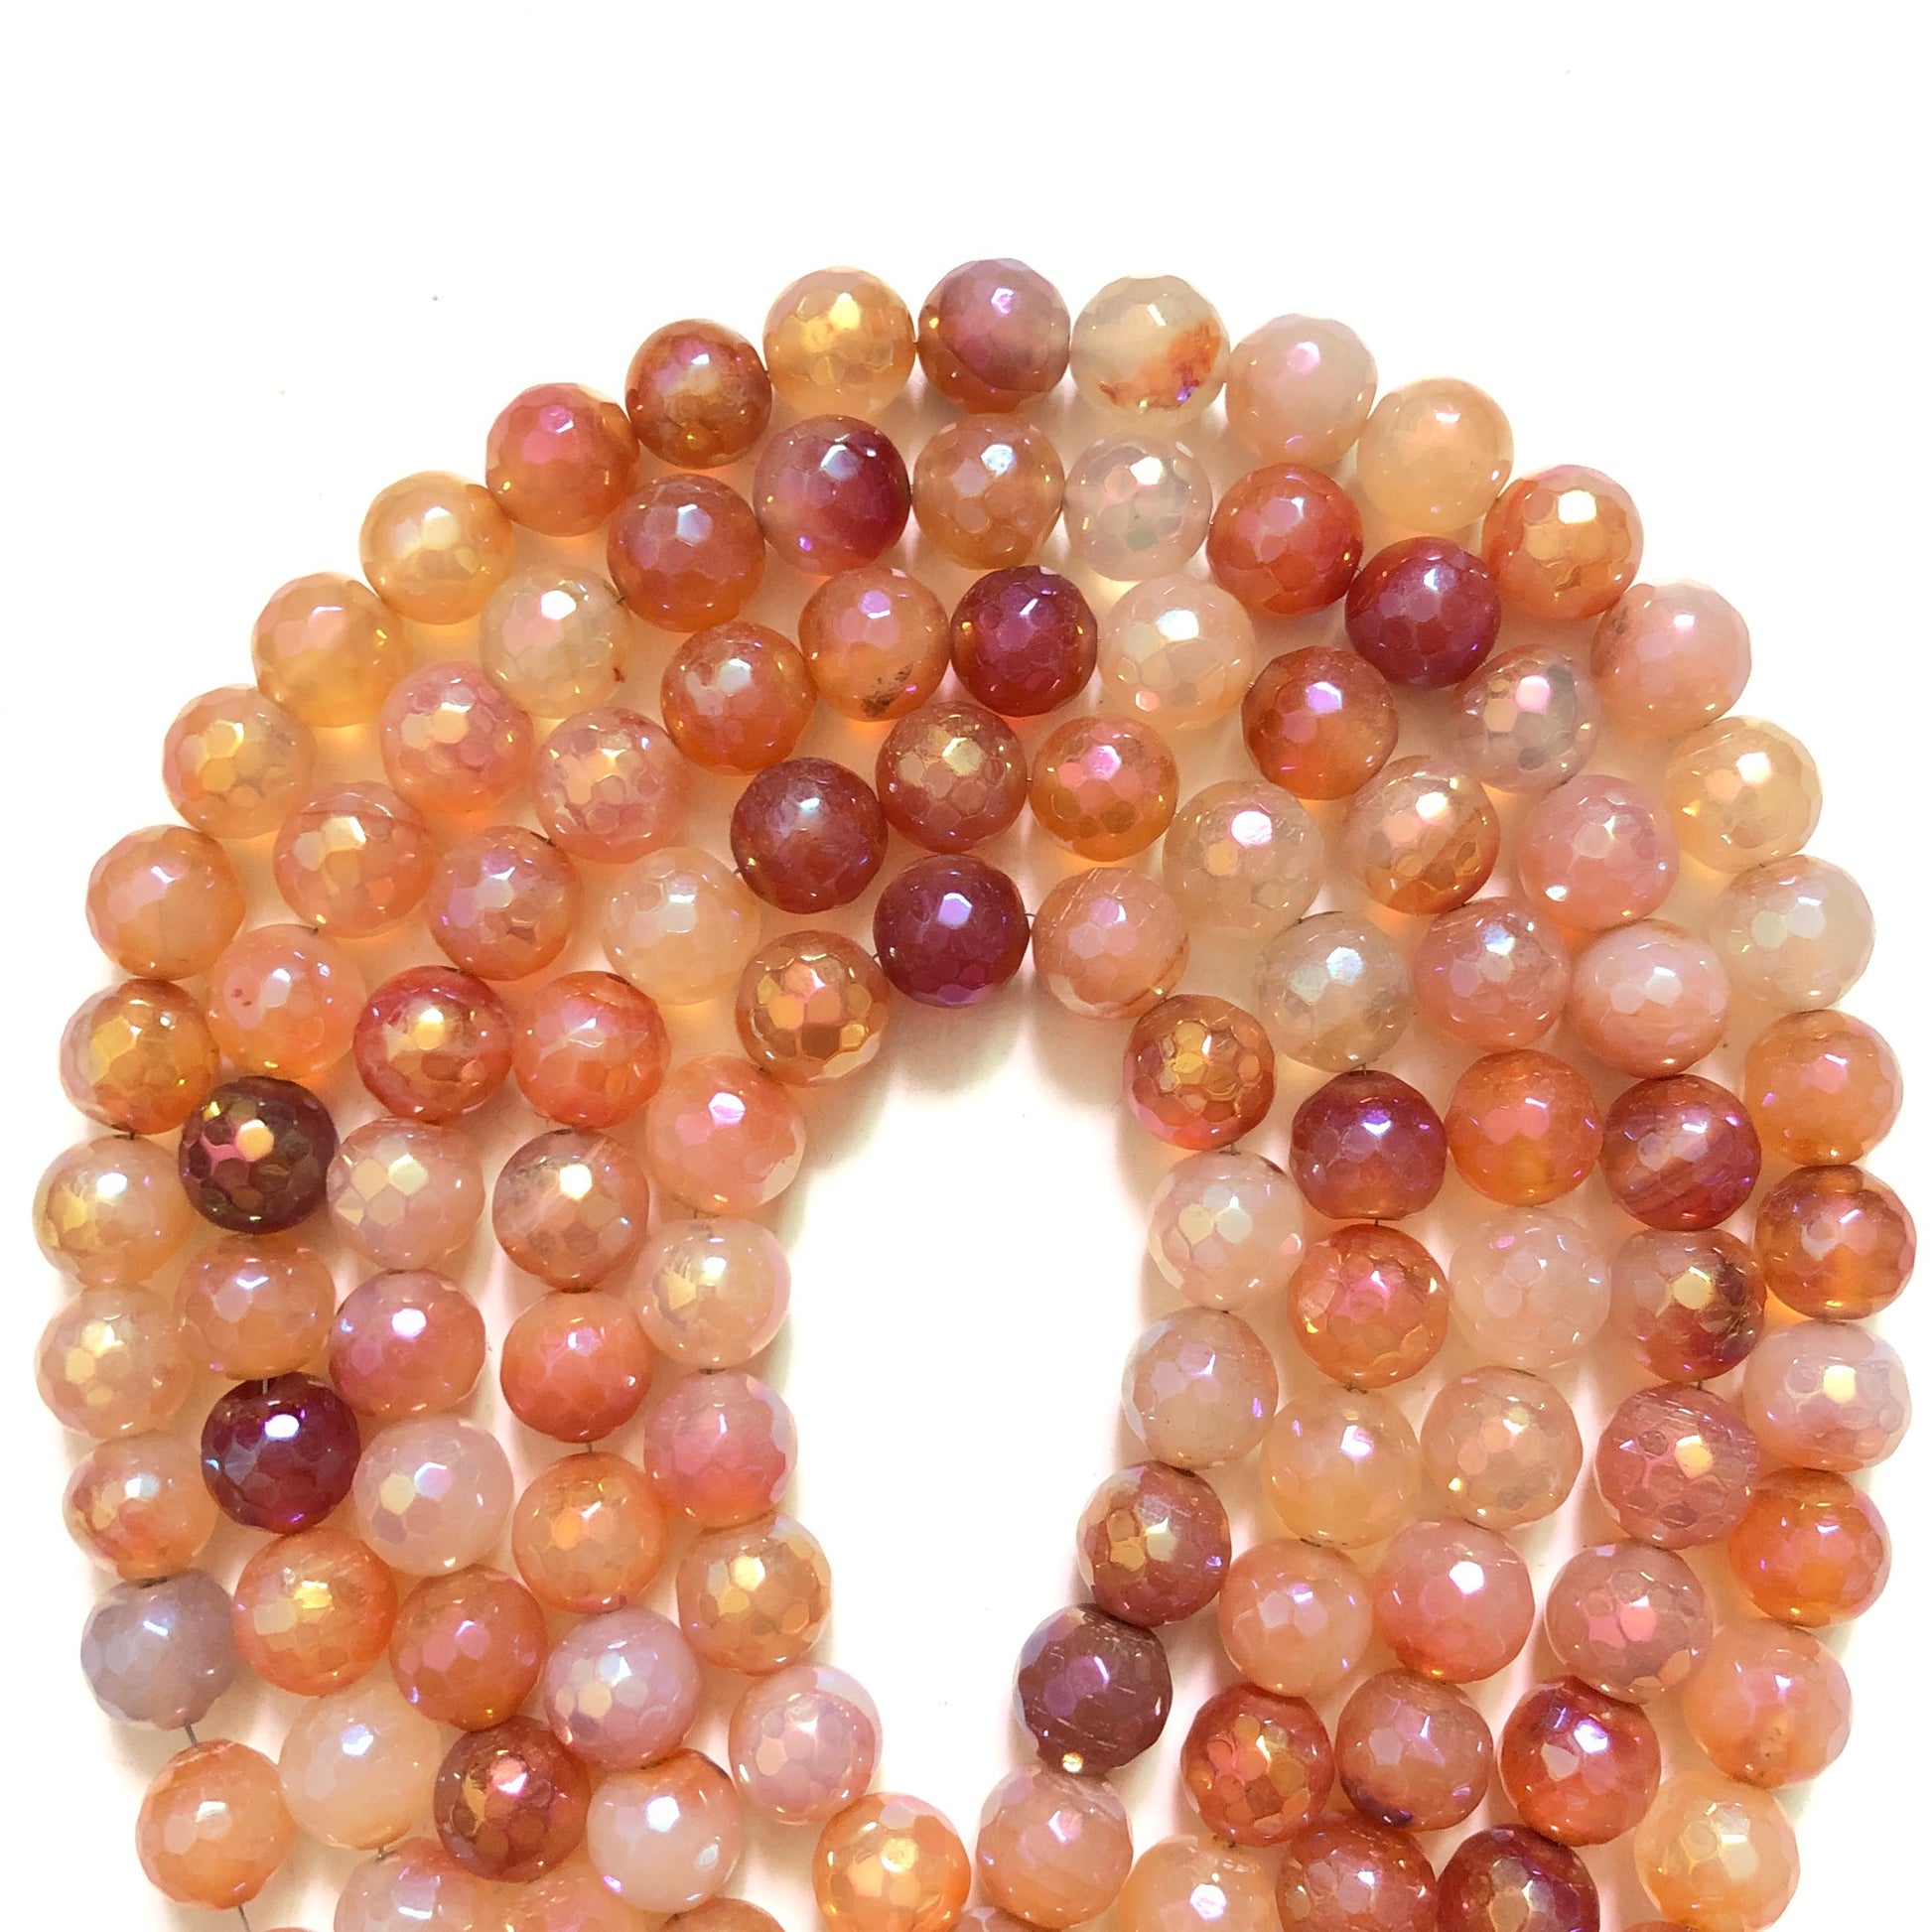 2 Strands/lot 10mm Electroplated AB Orange White Agate Faceted Stone Beads Electroplated Beads Electroplated Faceted Agate Beads New Beads Arrivals Charms Beads Beyond